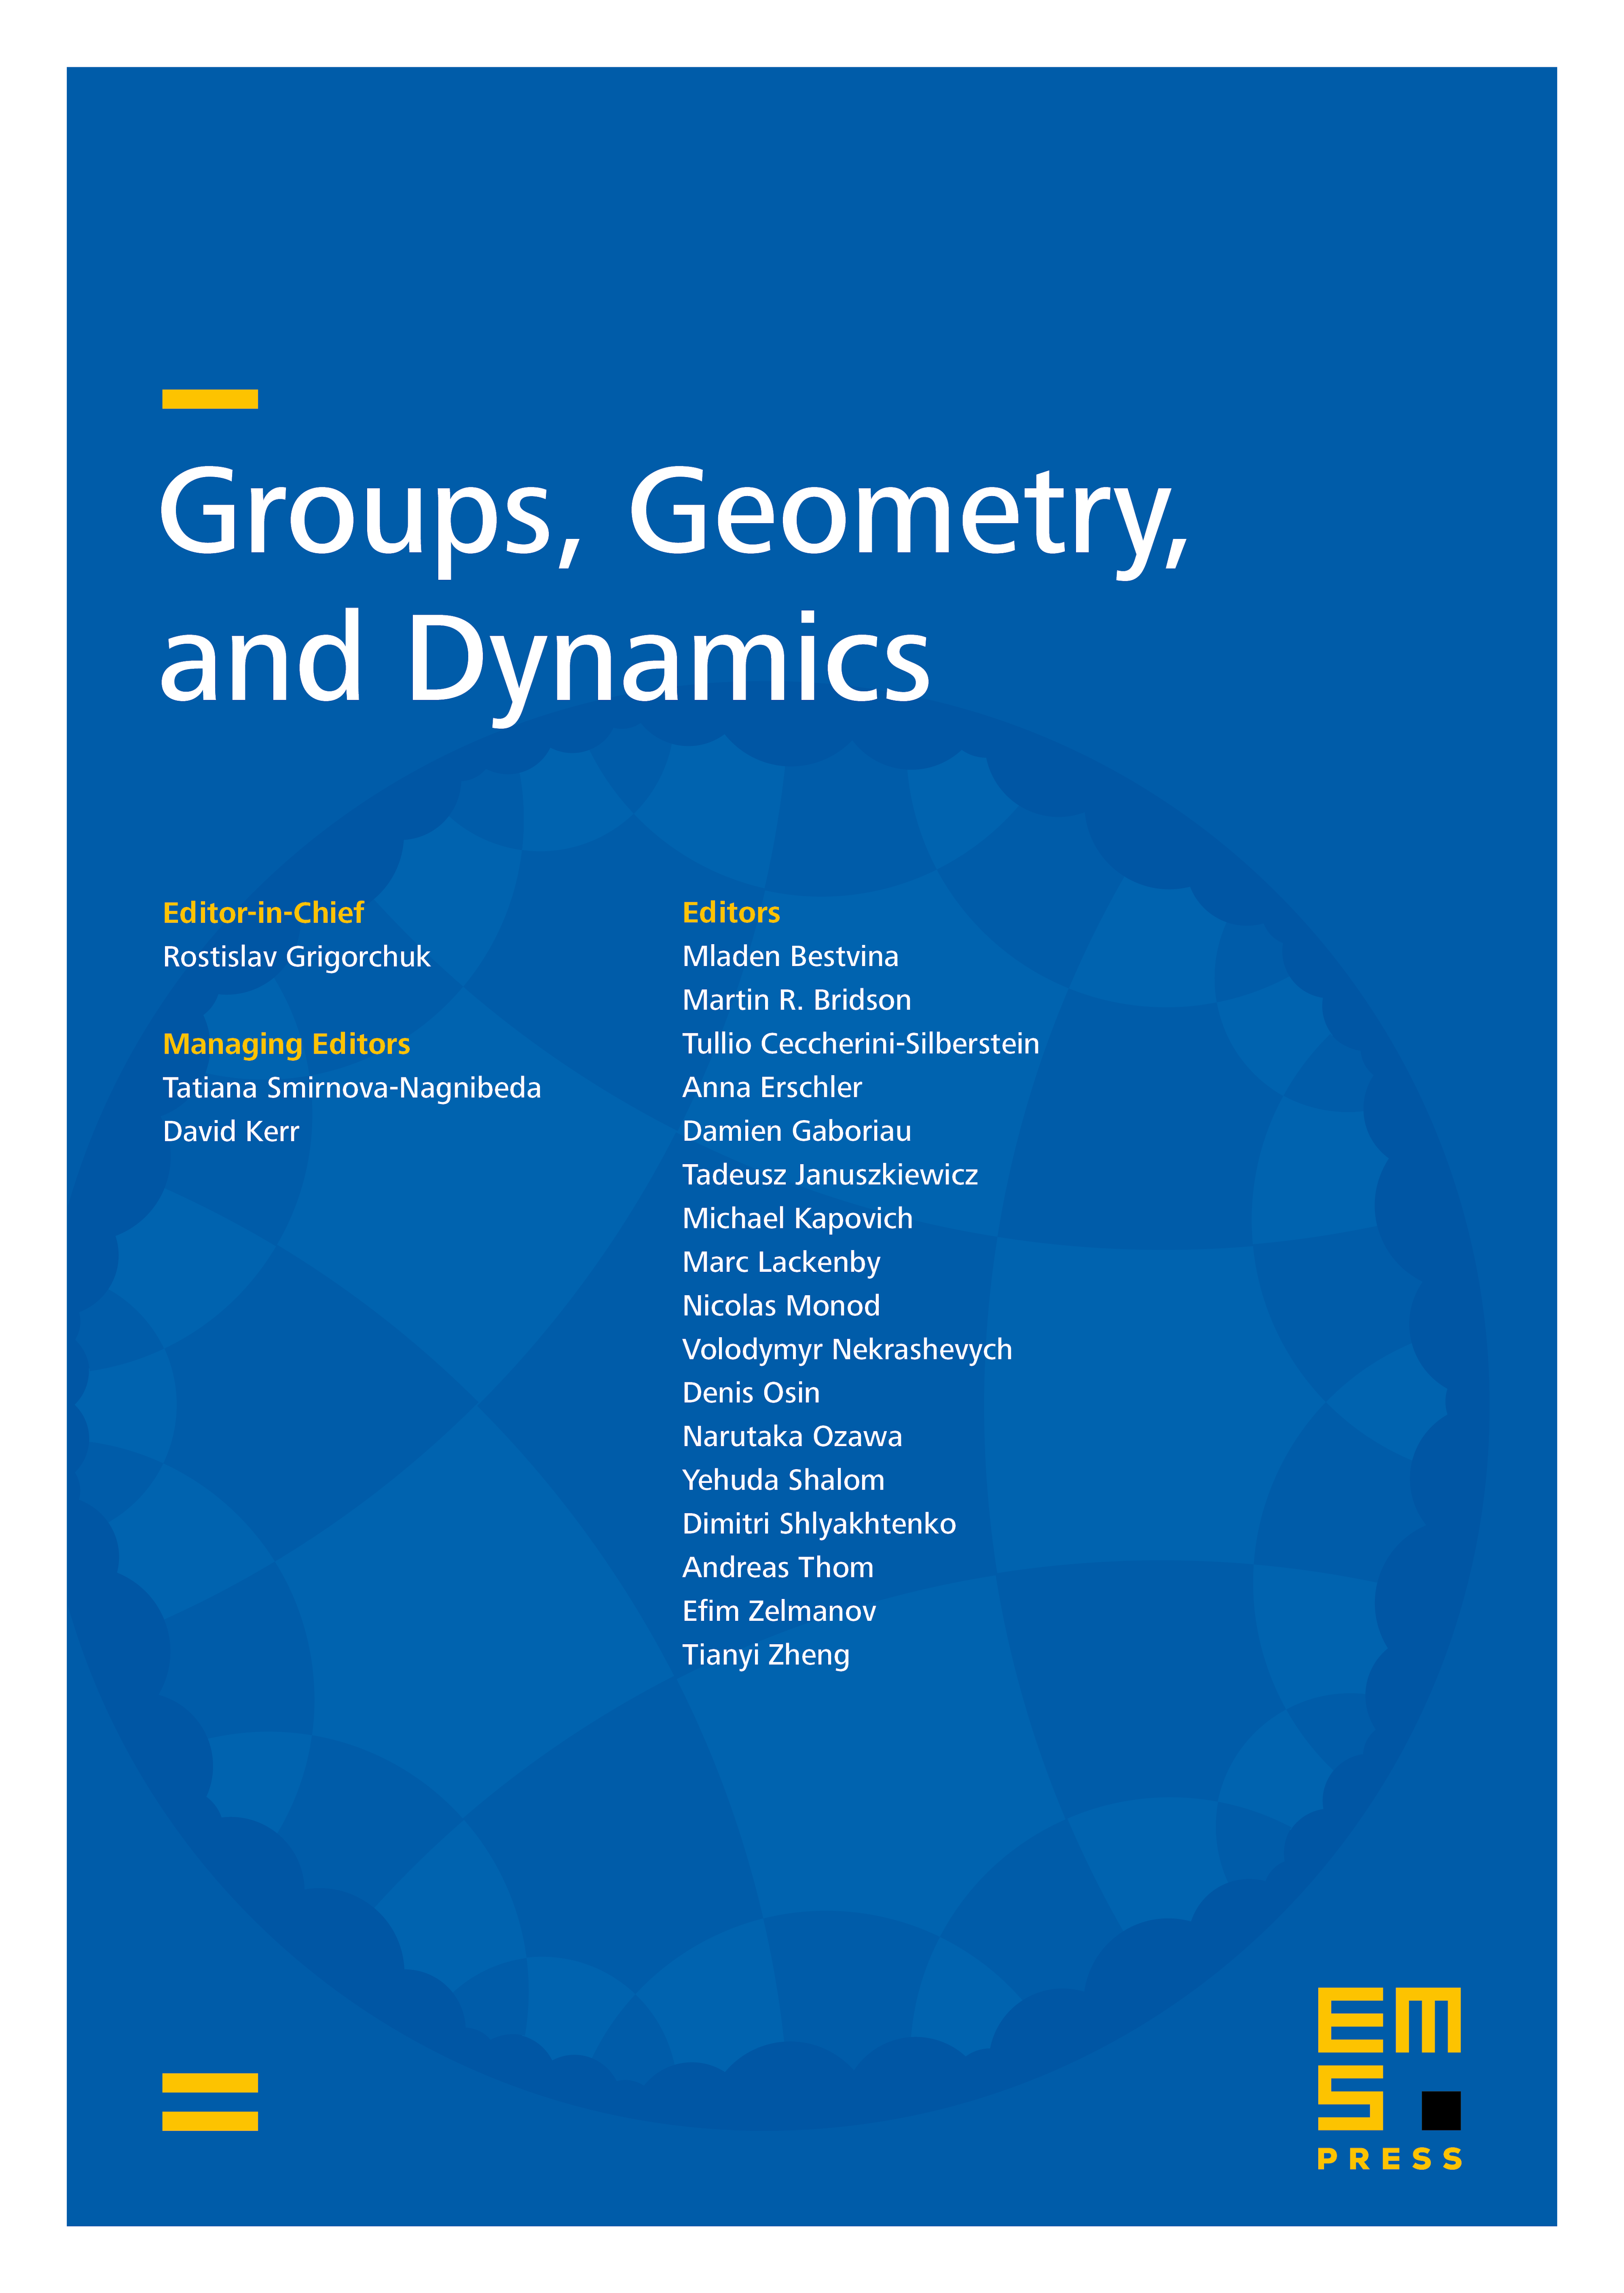 Hyperbolic immersions of free groups cover